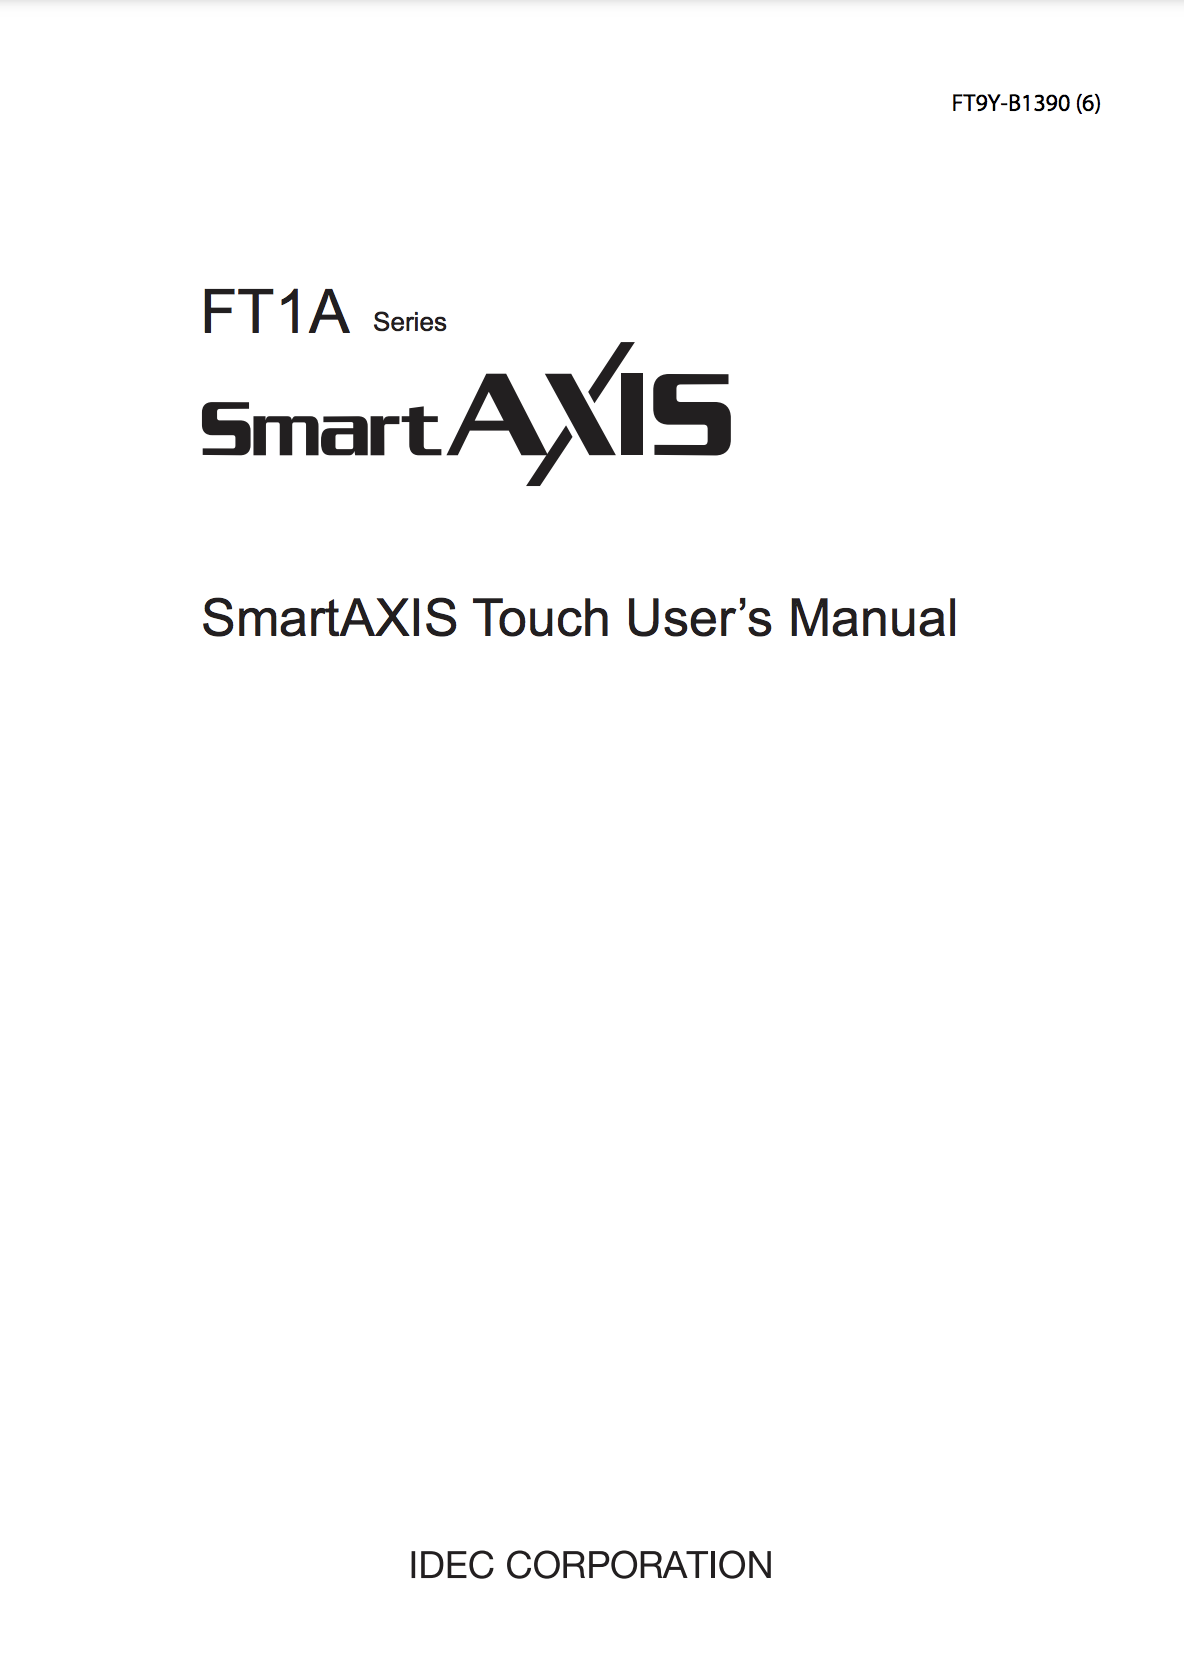 IDEC FT1A_SmartAXIS Touch Users Manual